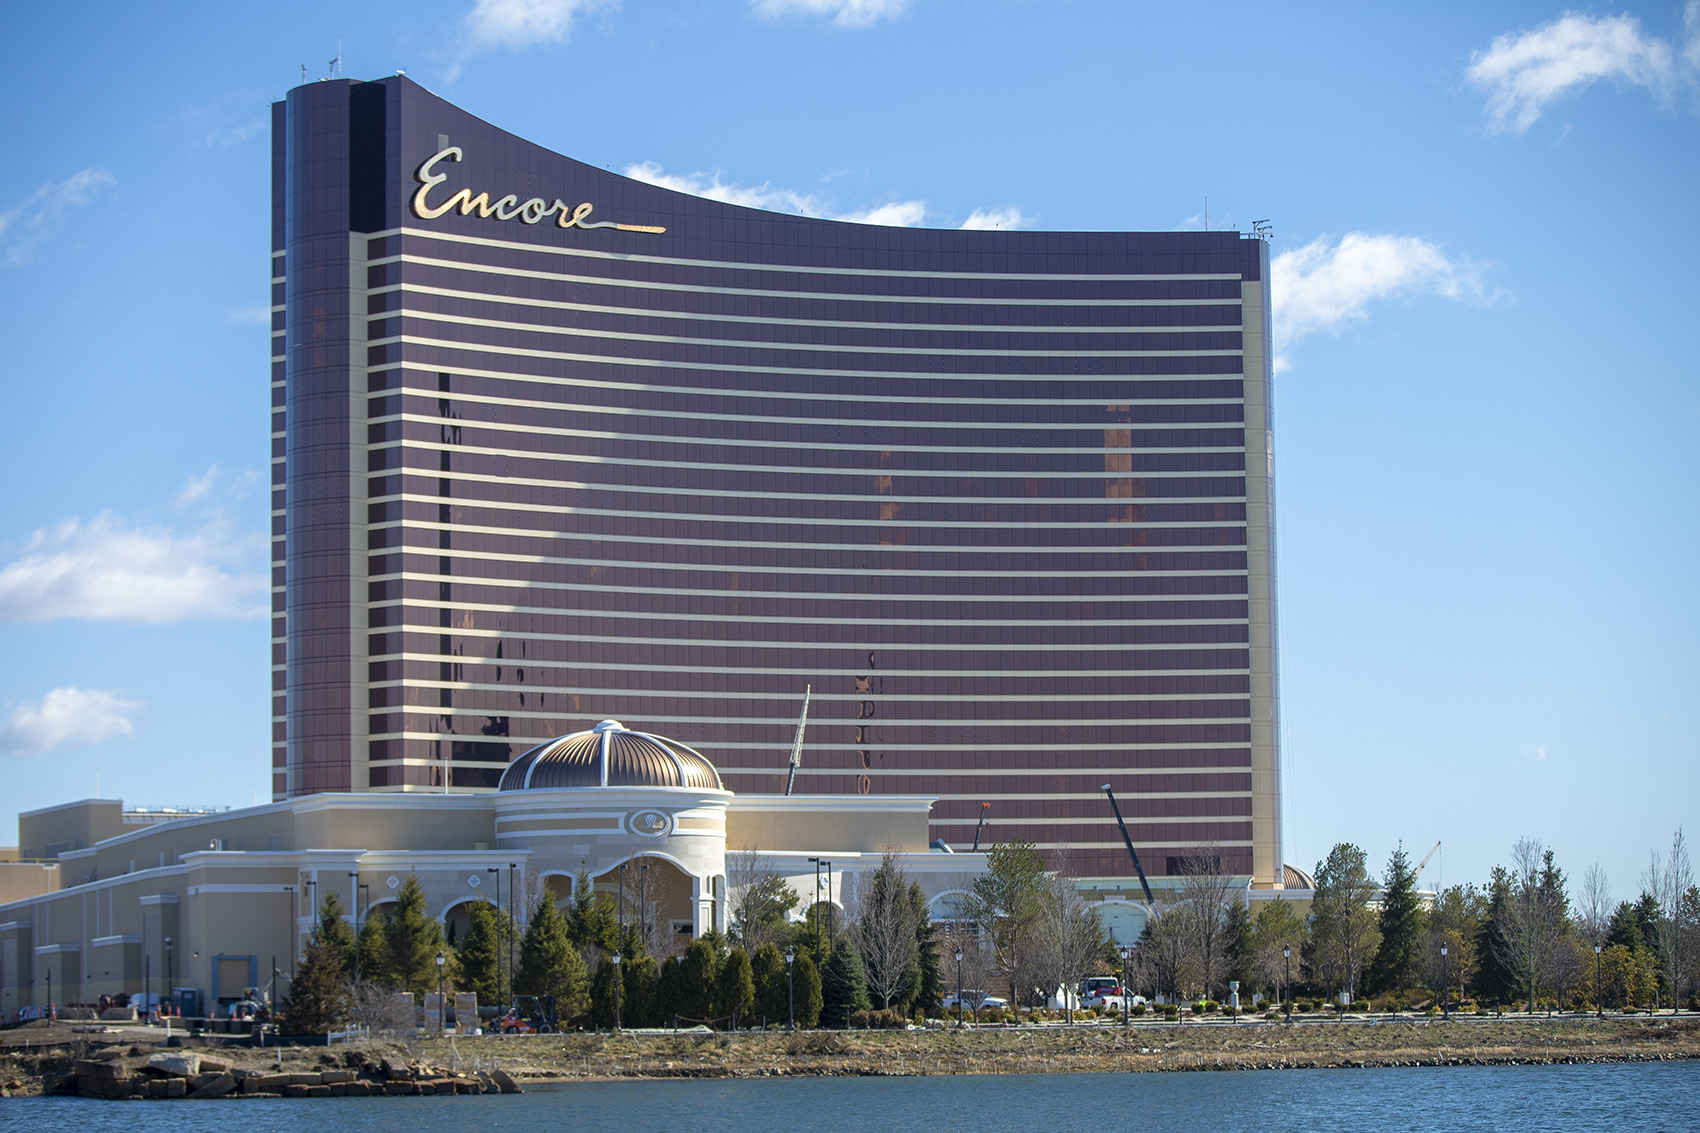 Man Proved Guilty for Polluting Encore Boston Harbor by Turning It into an Illegal Market